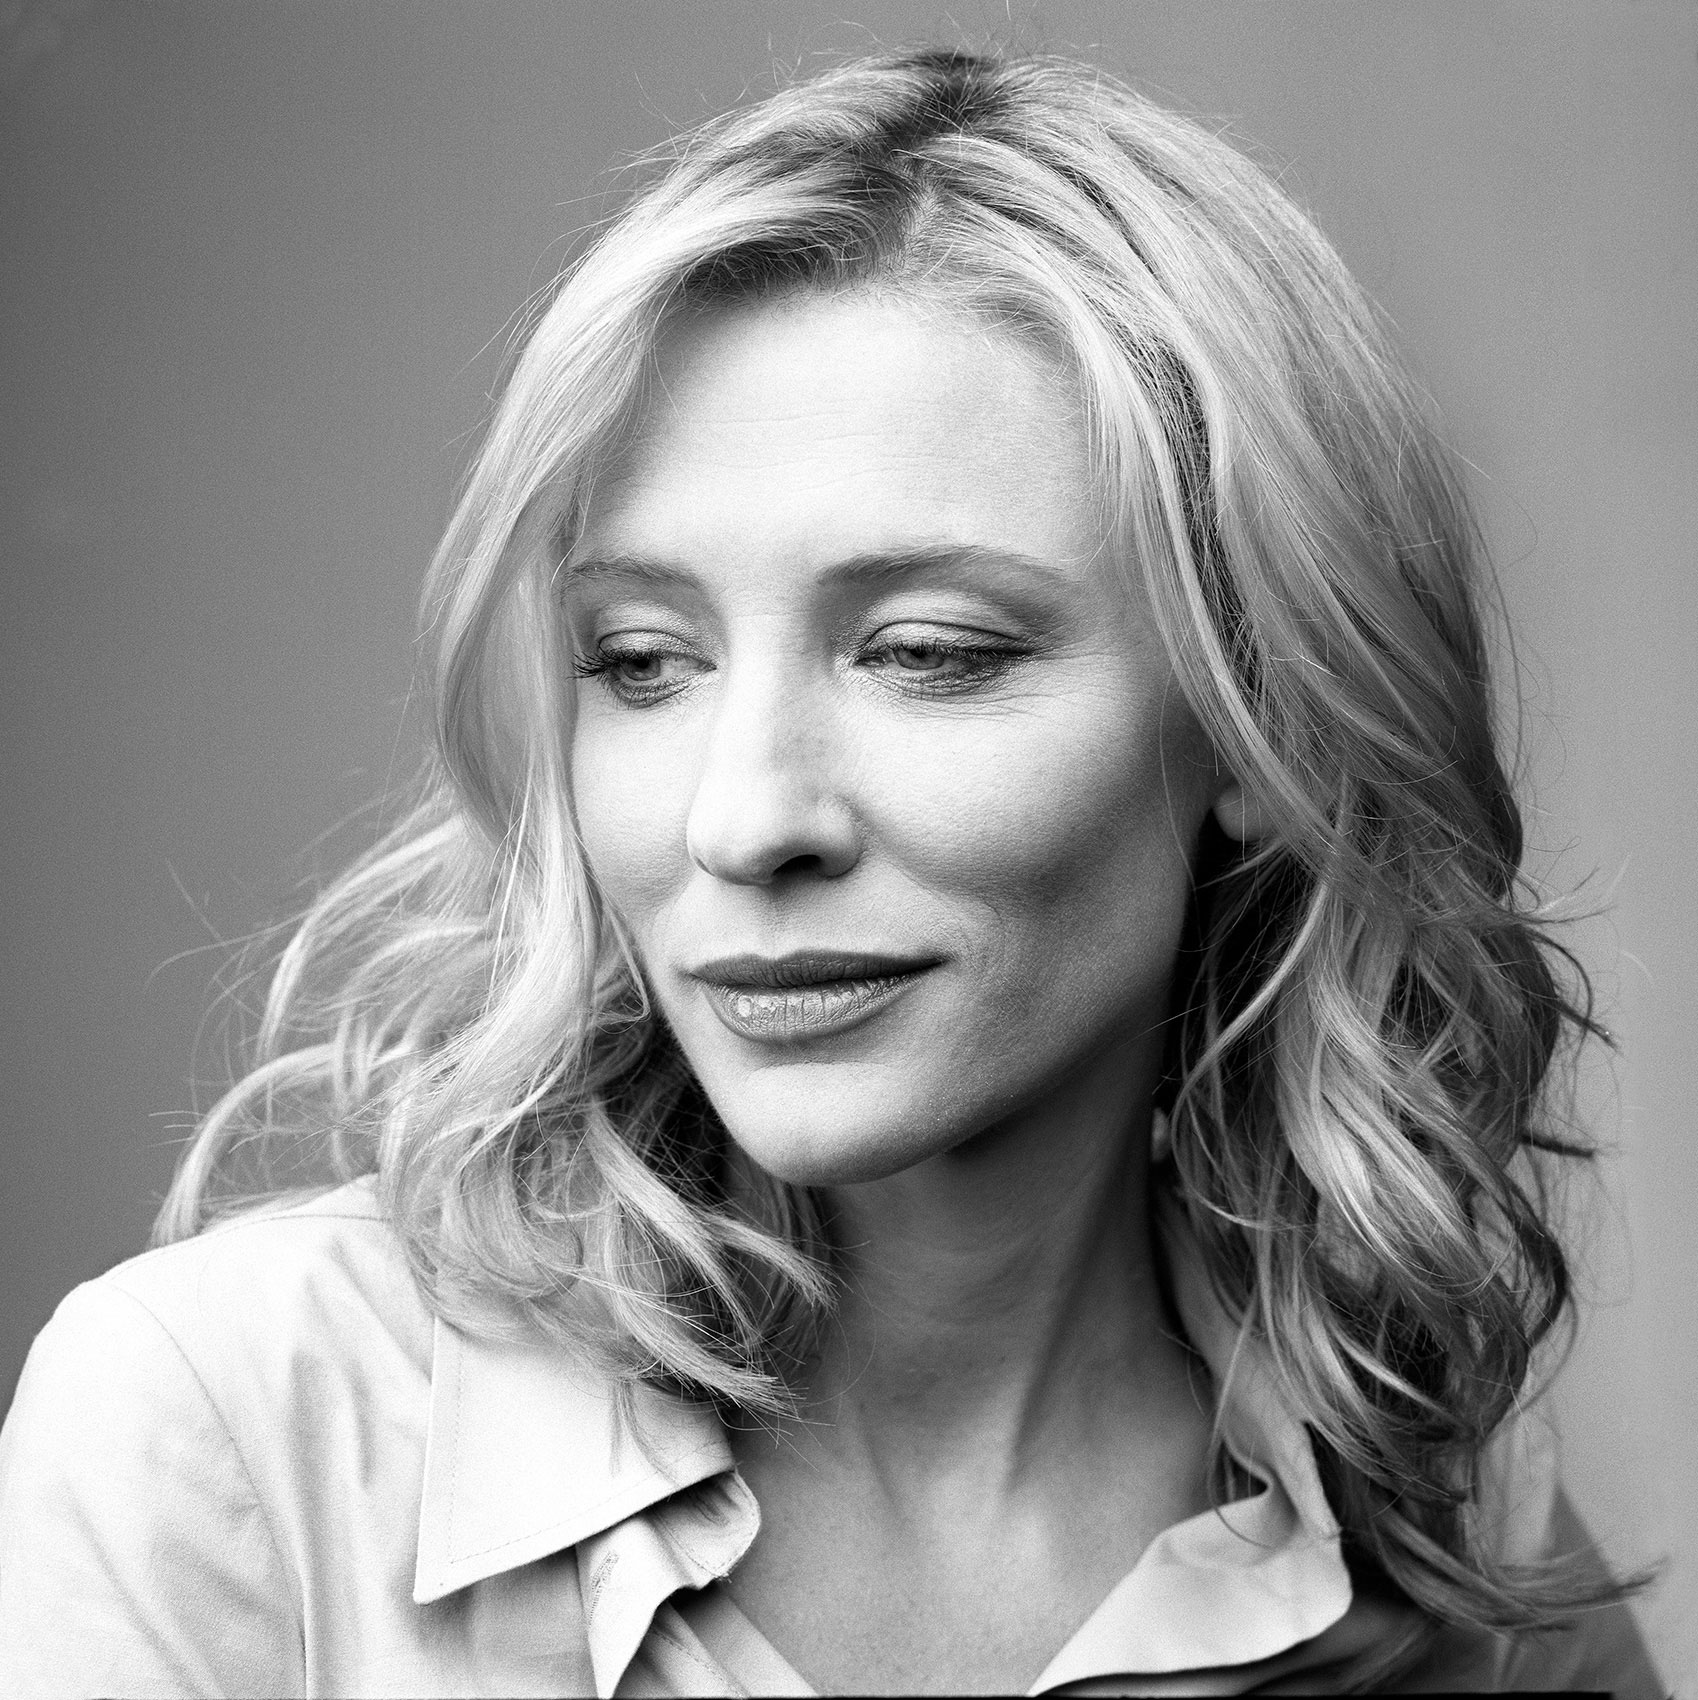 Cate Blanchett editorial stock image. Image of famous - 46150714